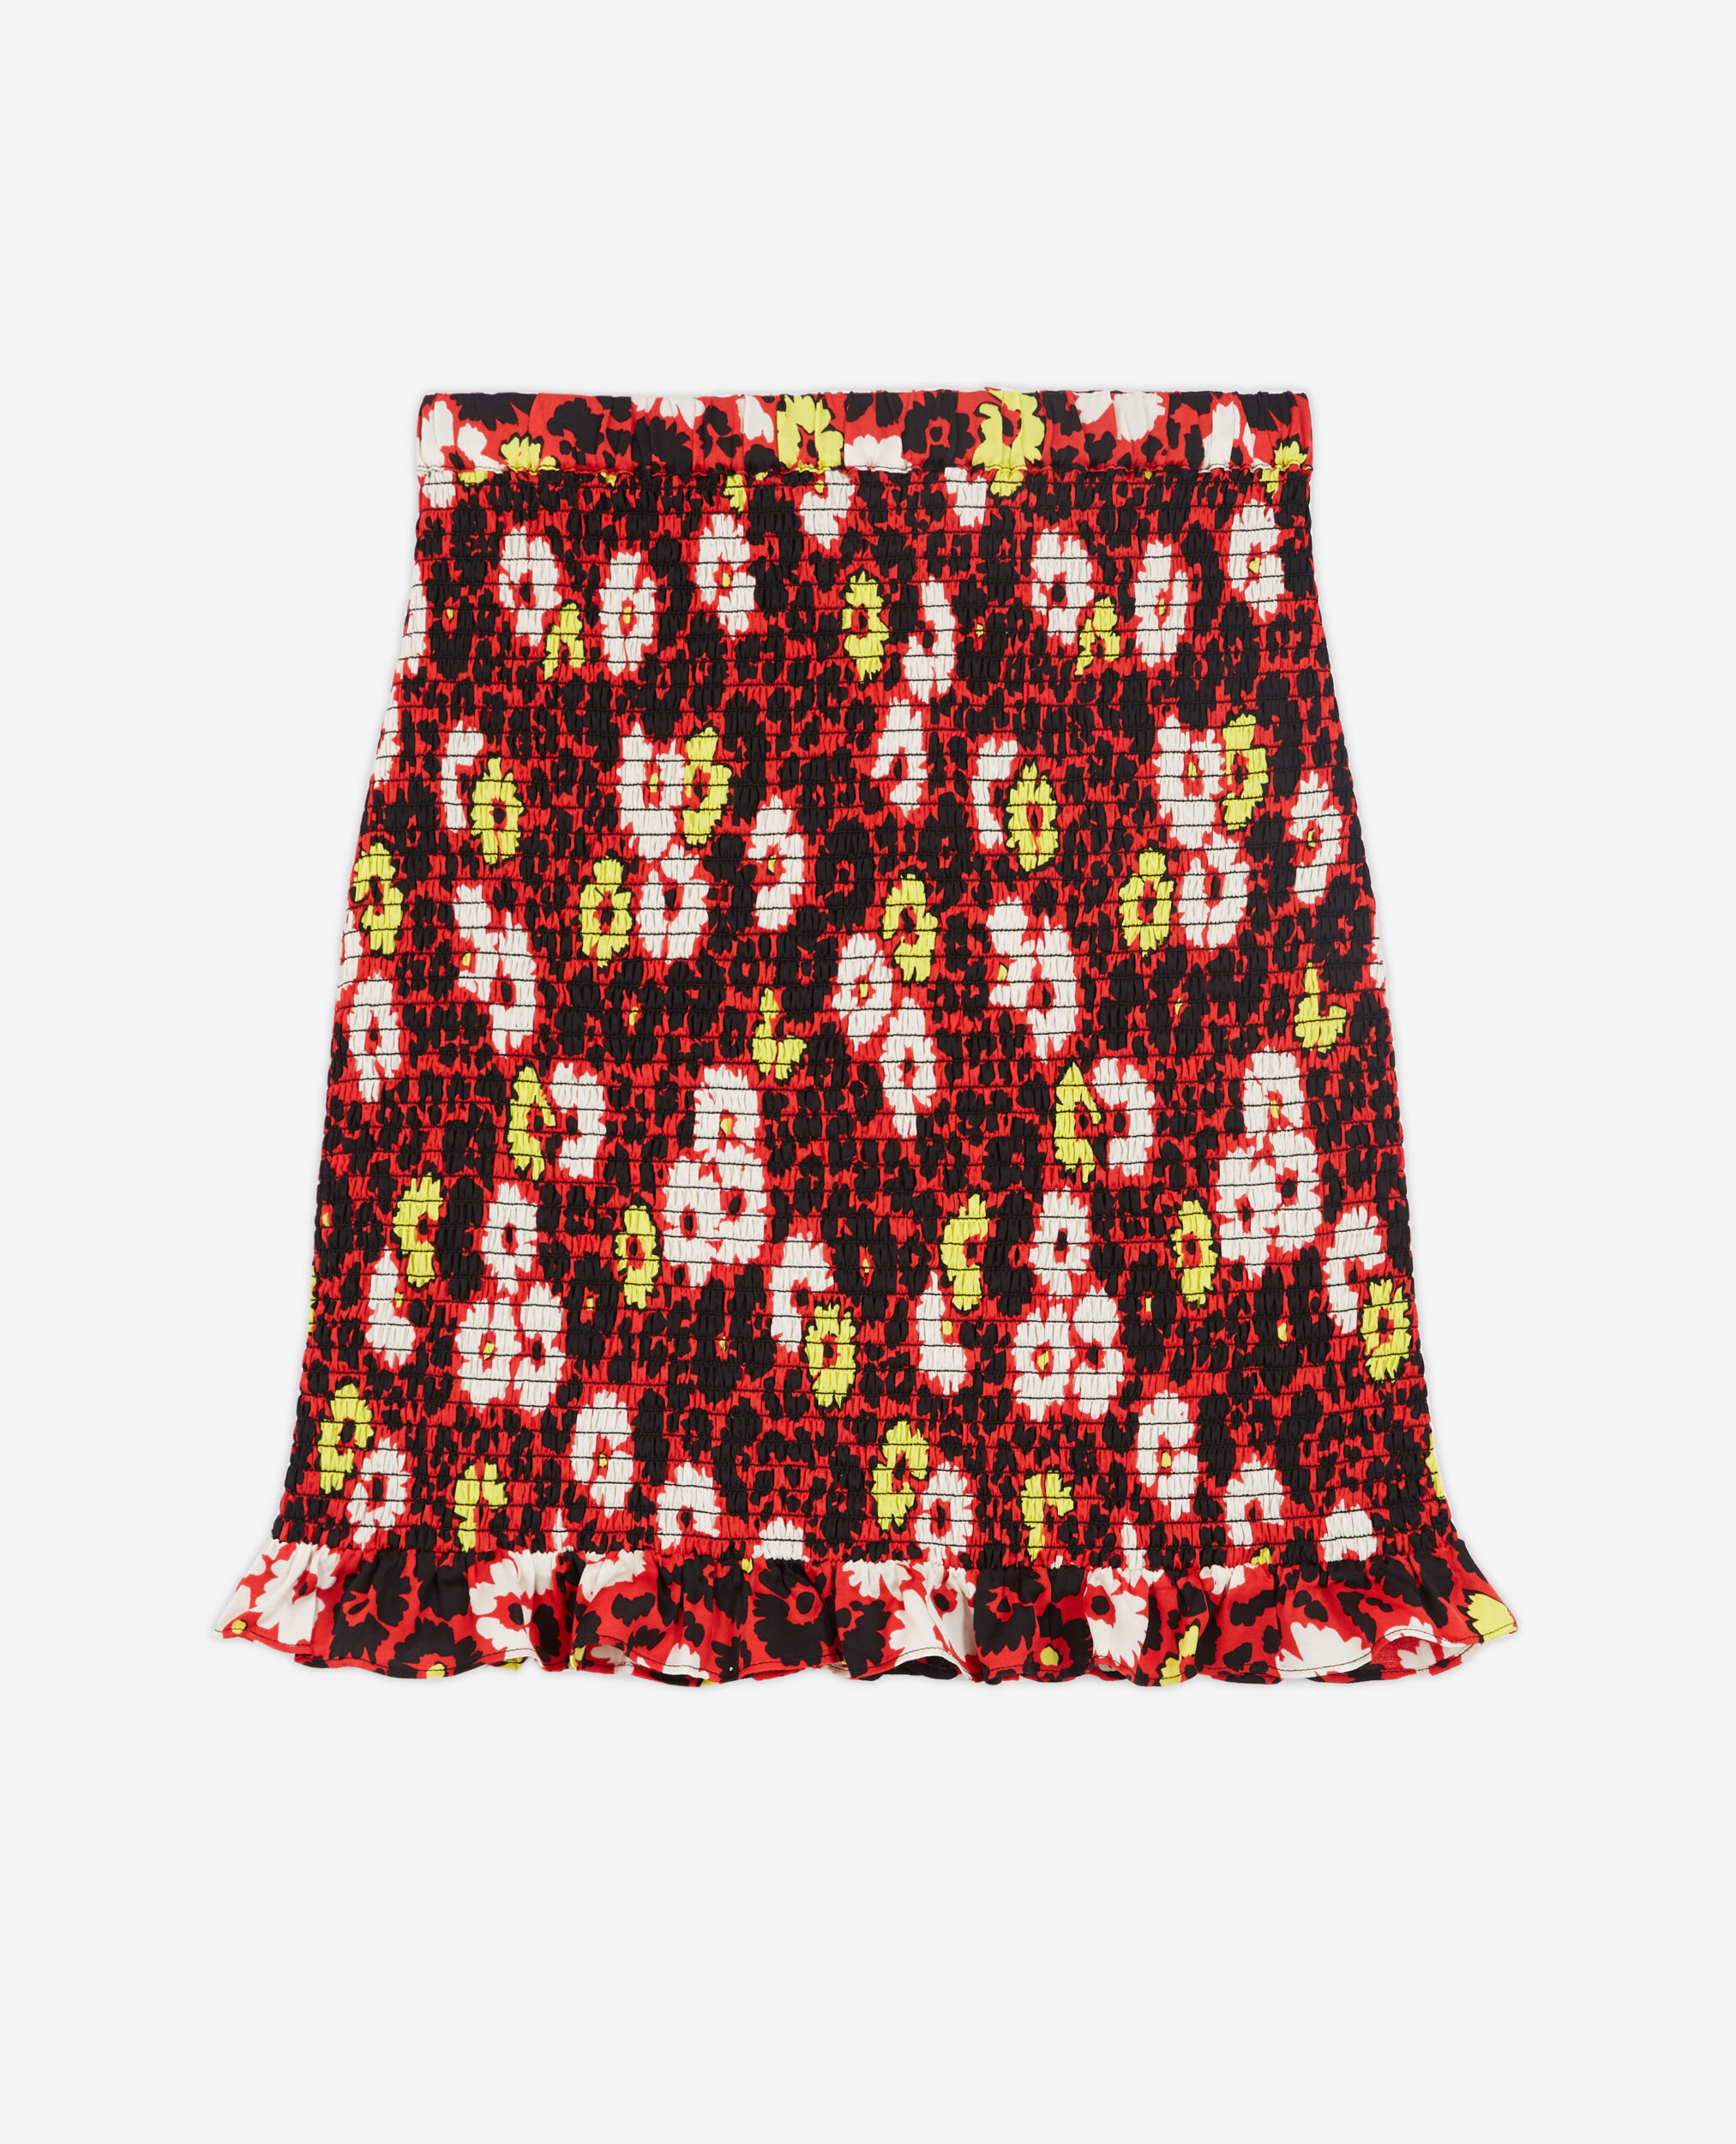 Floral print short skirt, RED / YELLOW, hi-res image number null